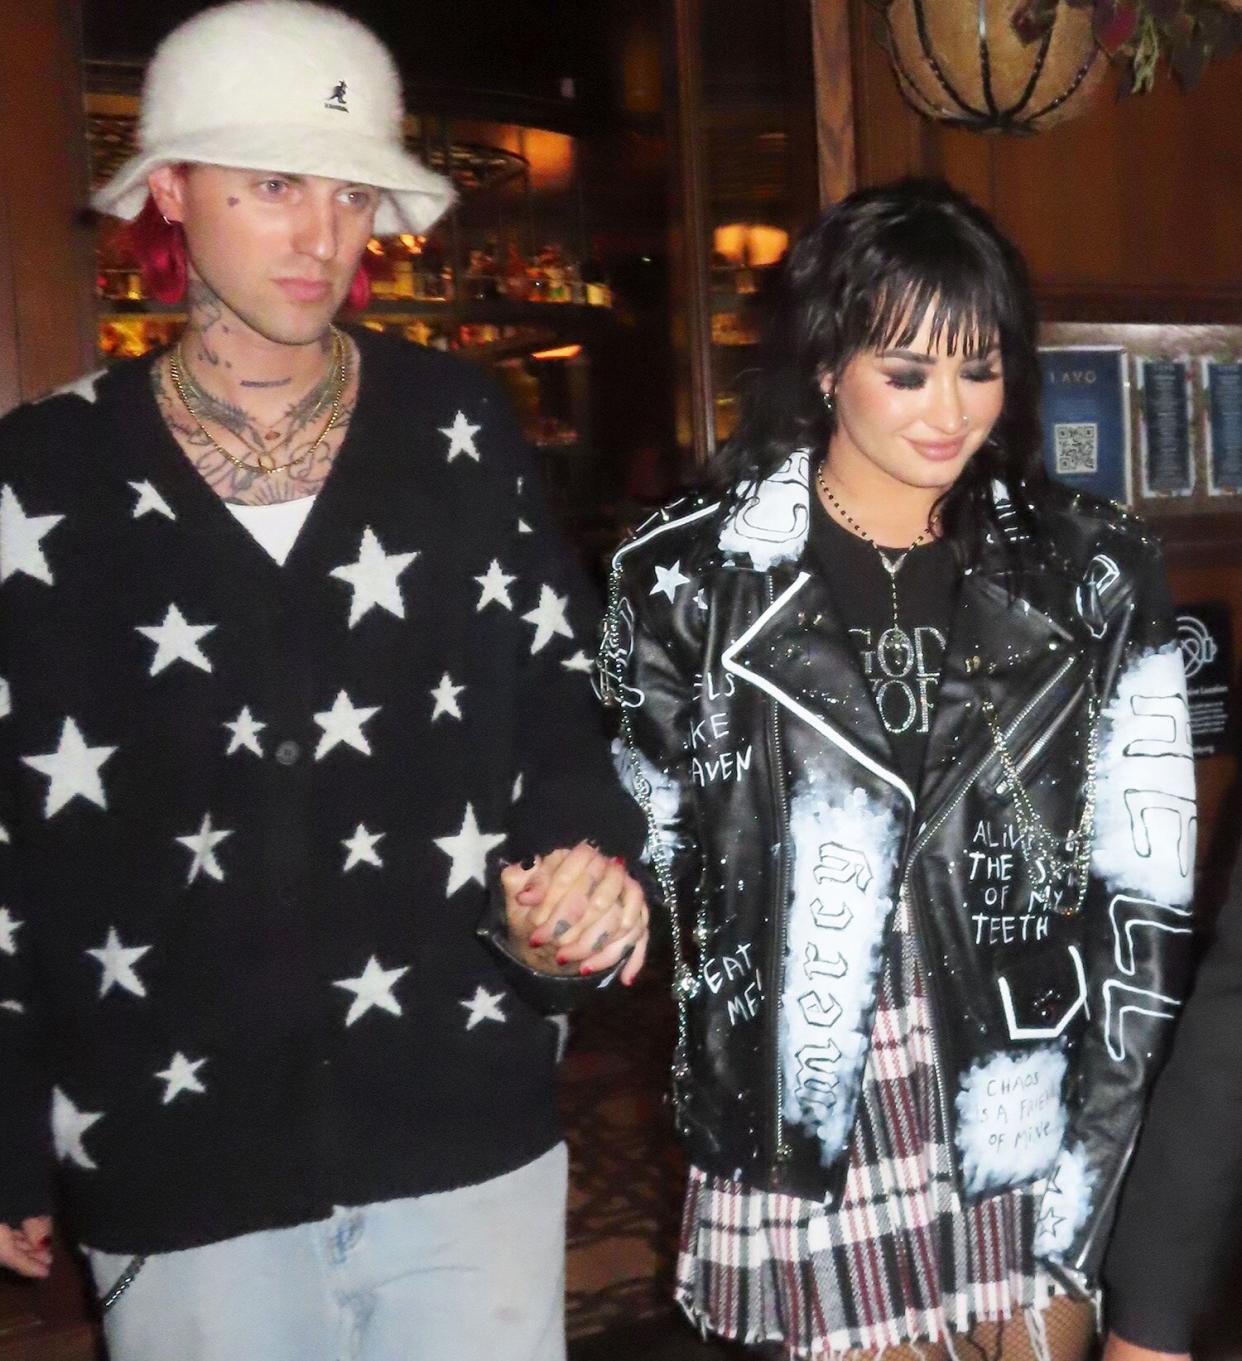 Demi Lovato and Jutes stop by Lavo in NYC